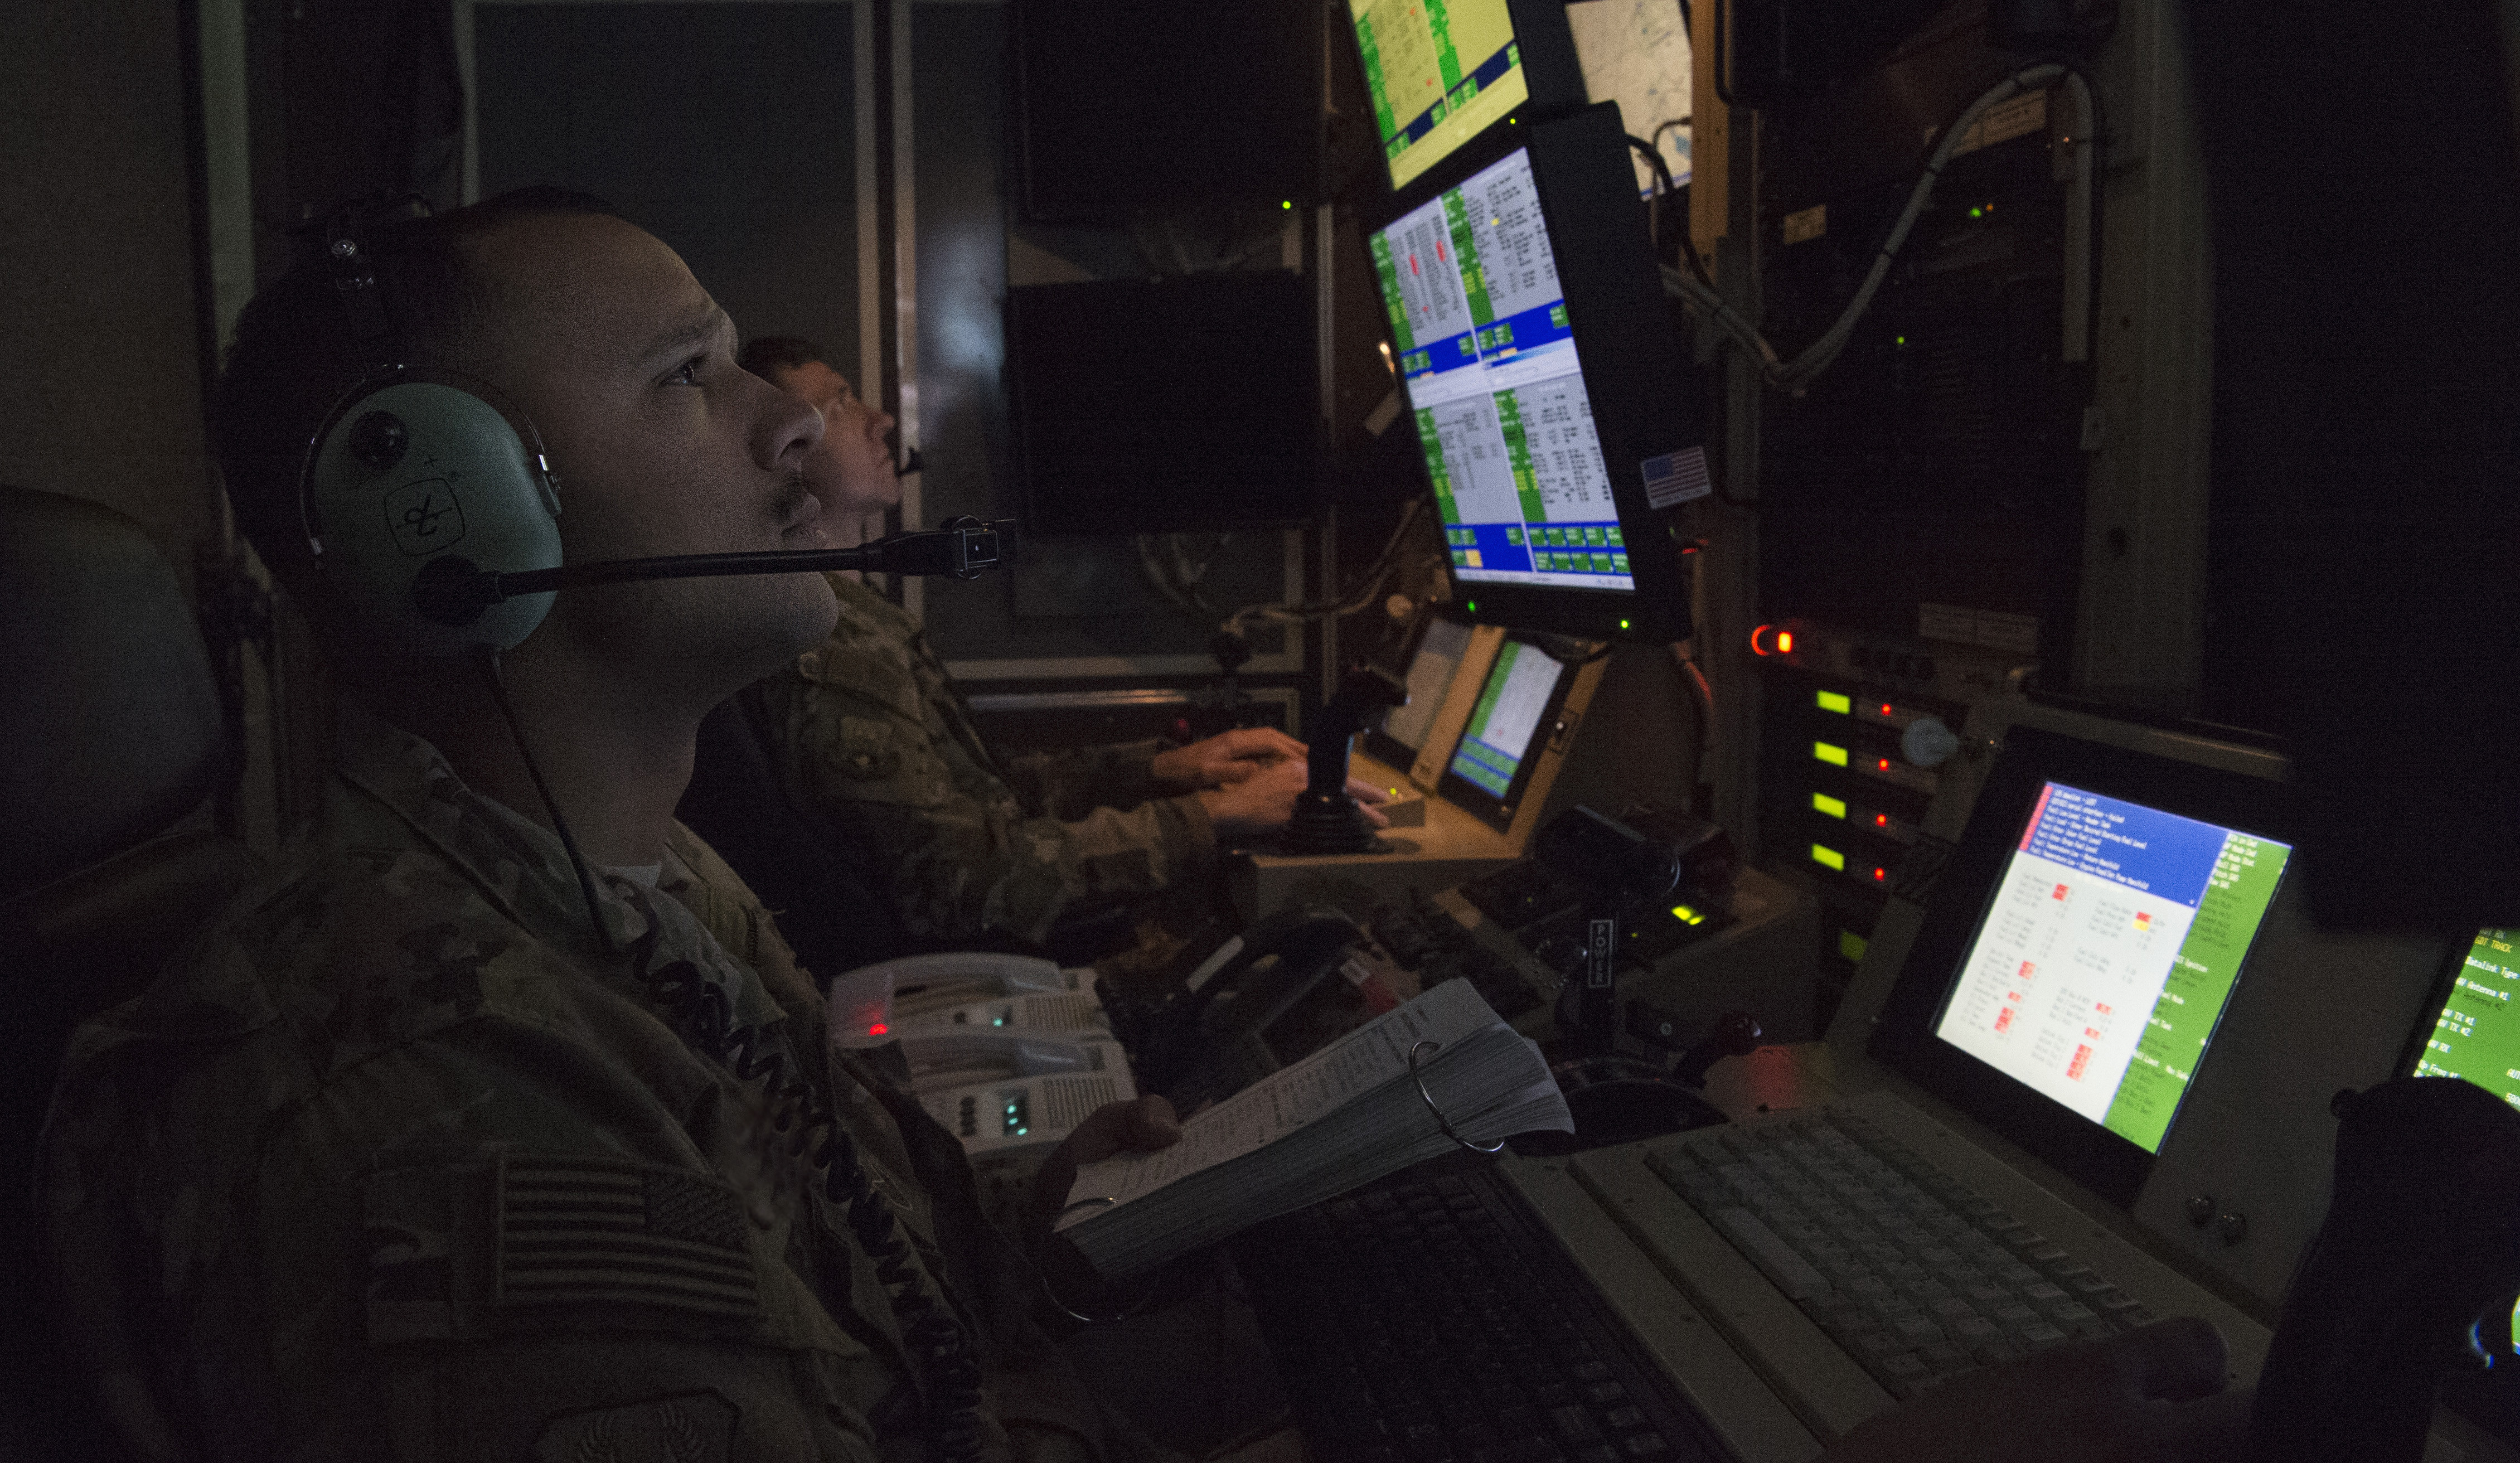 Capt. Derrick, 46th Expeditionary Attack Squadron pilot, and Staff Sgt. Marcus, 46th EATKS MQ-9 sensor operator, check aircraft system operations during preflight of an MQ-9 Reaper at an undisclosed location in Southwest Asia, Feb. 21, 2019. (Staff Sgt. Arielle Vasquez—386th Air Expeditionary Wing Pub/U.S. Air Force)